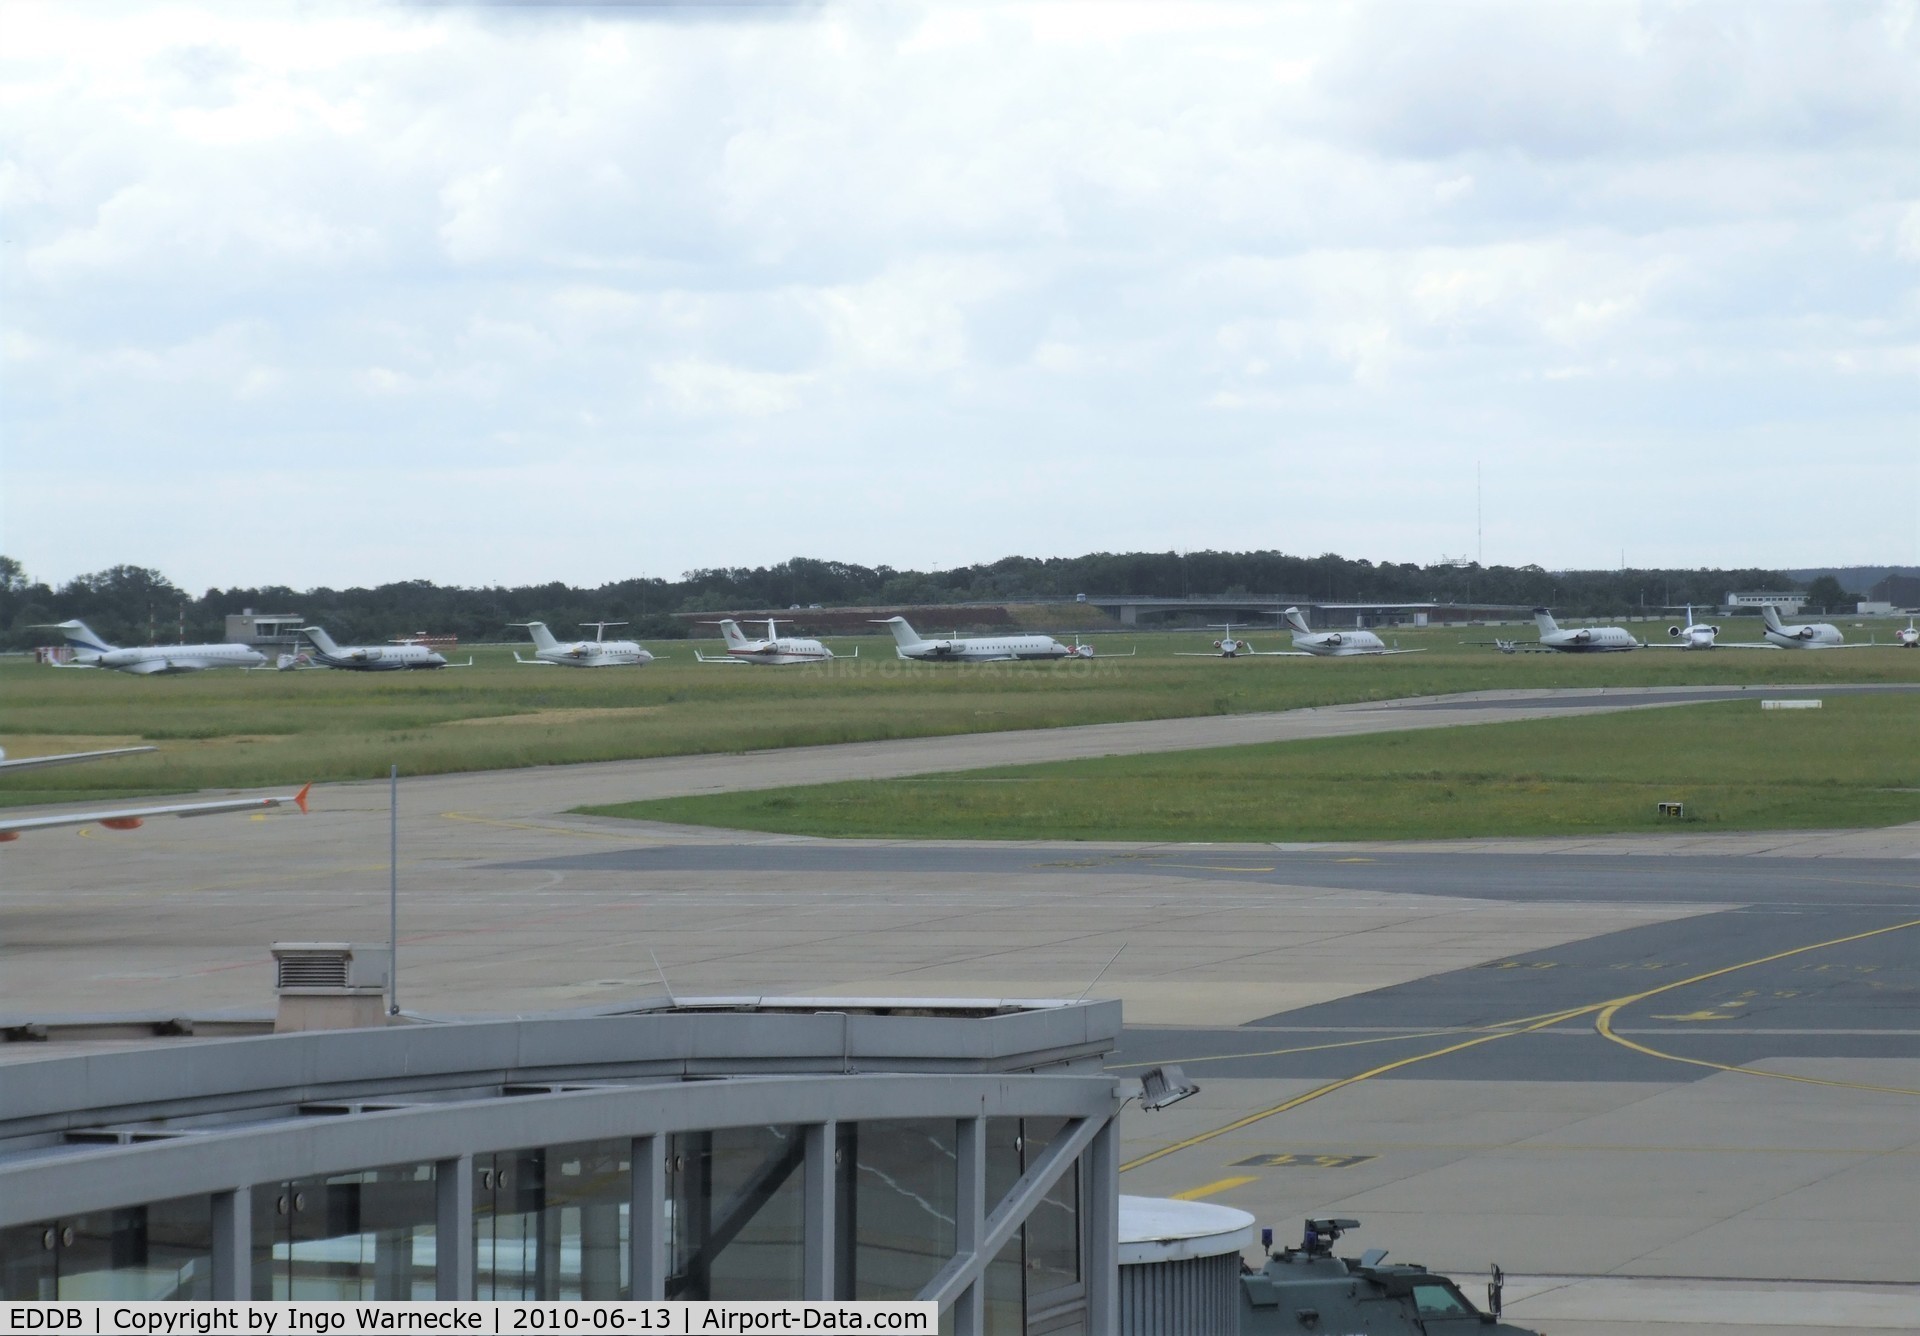 Berlin Brandenburg International Airport, Berlin Germany (EDDB) - looking at the apron and a lot of business jets parked at Schönefeld airport